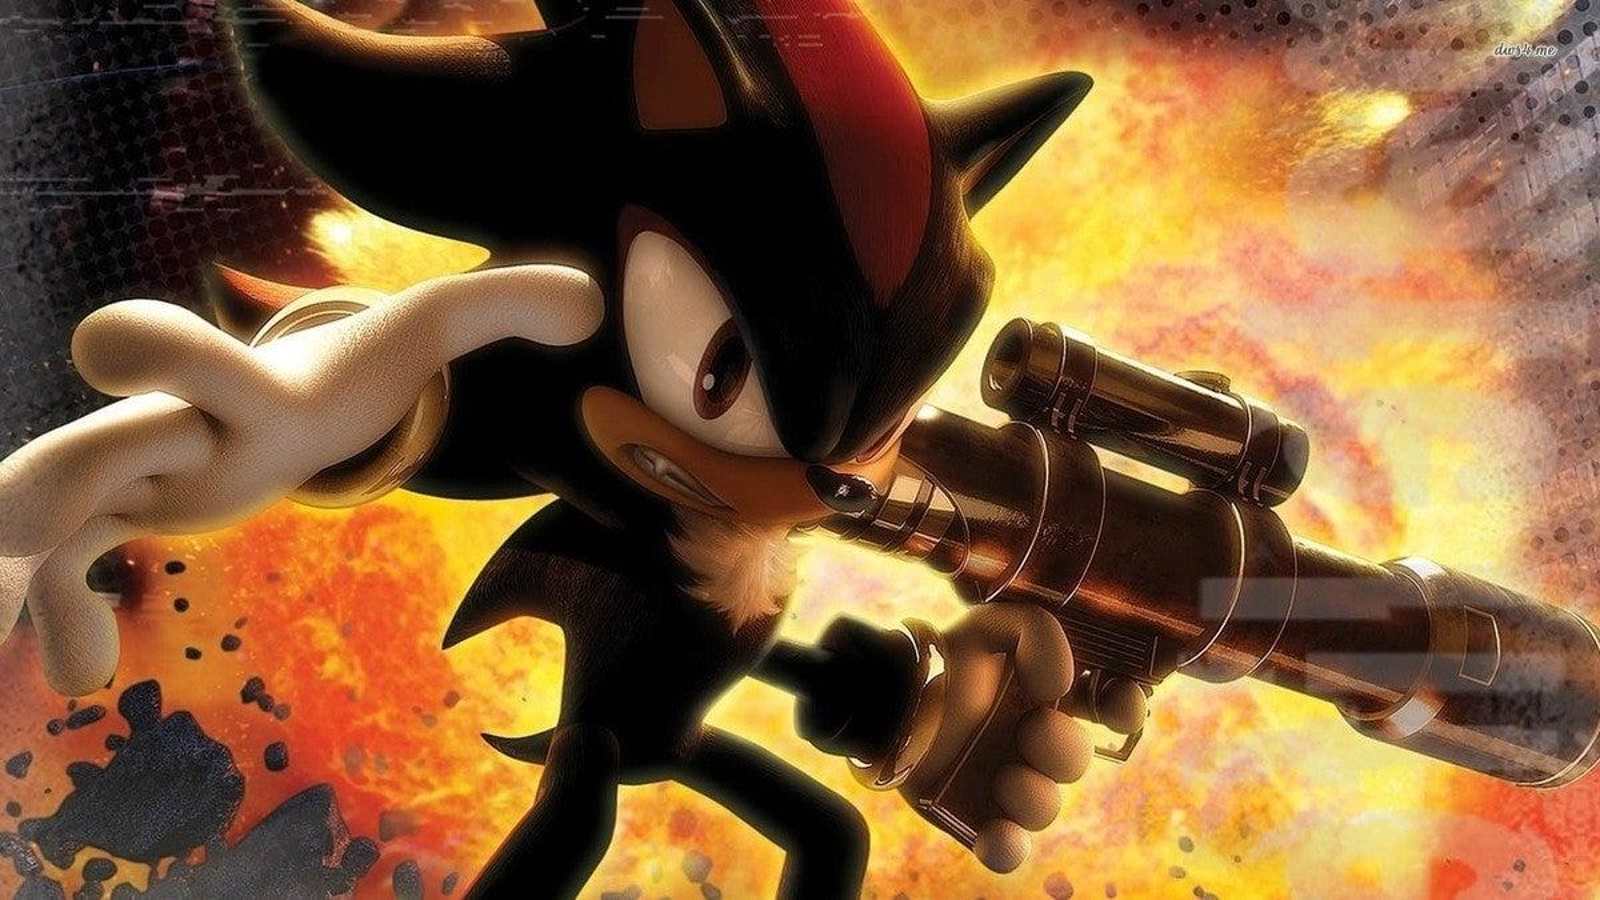 IS IT ME OR DOES IT SEEM LIKE SHADOW THE HEDGEHOG ALWAYS GET THE